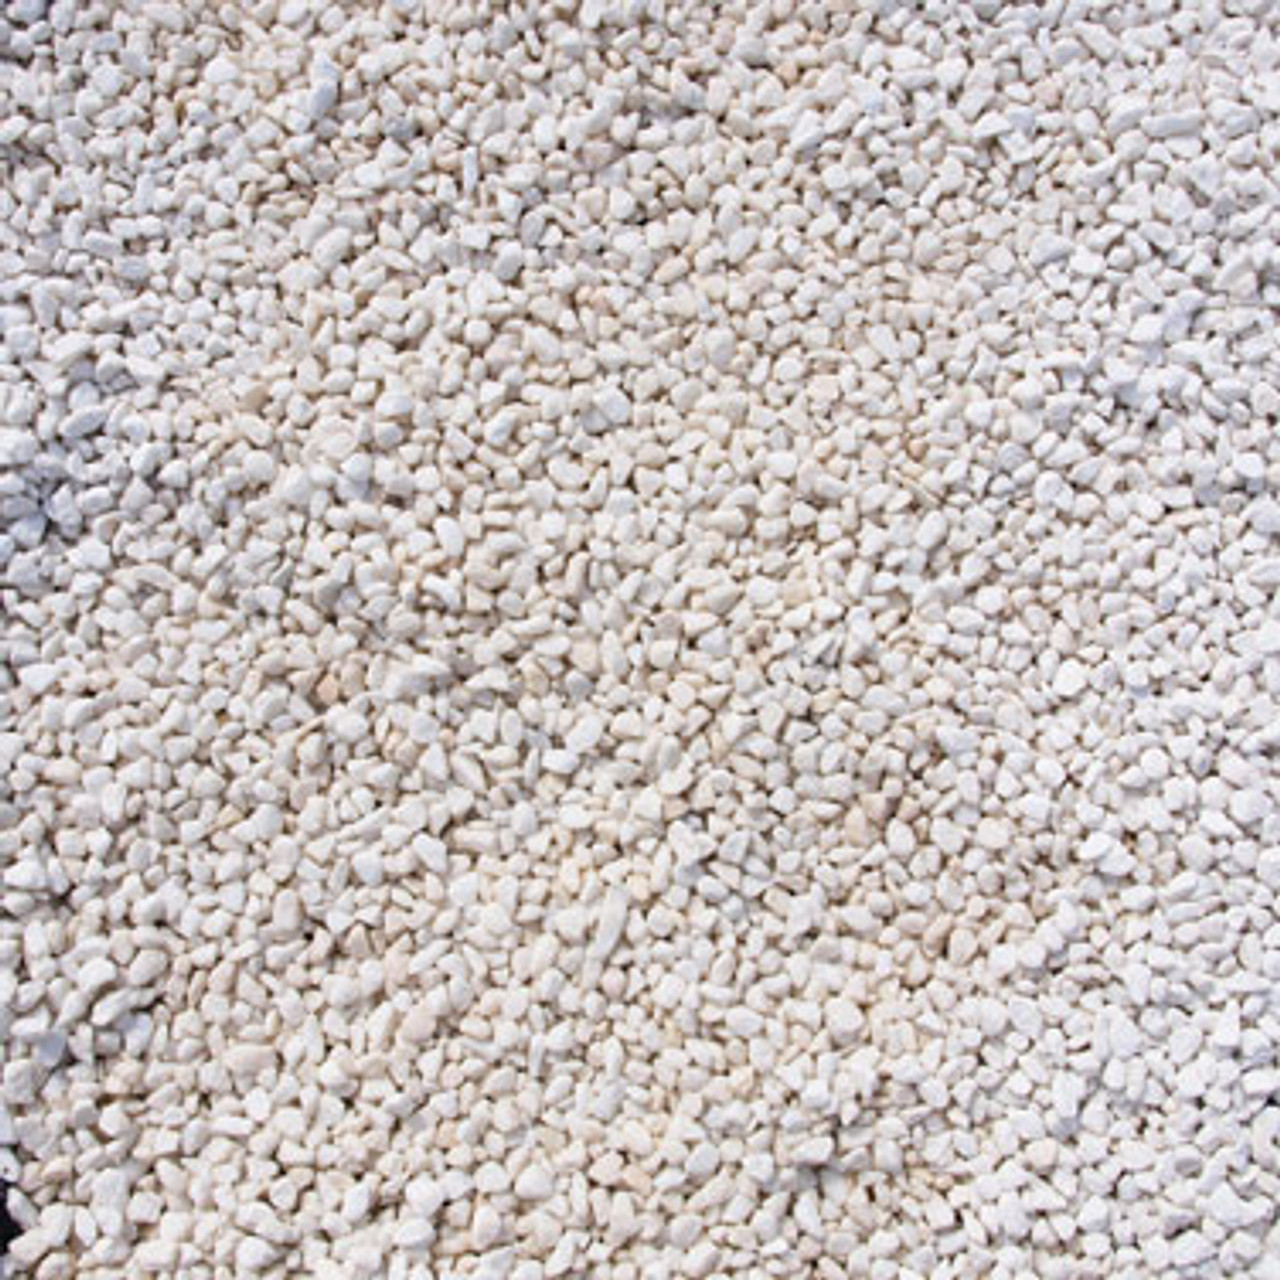 Heritage Stone White Spar decorative chippings